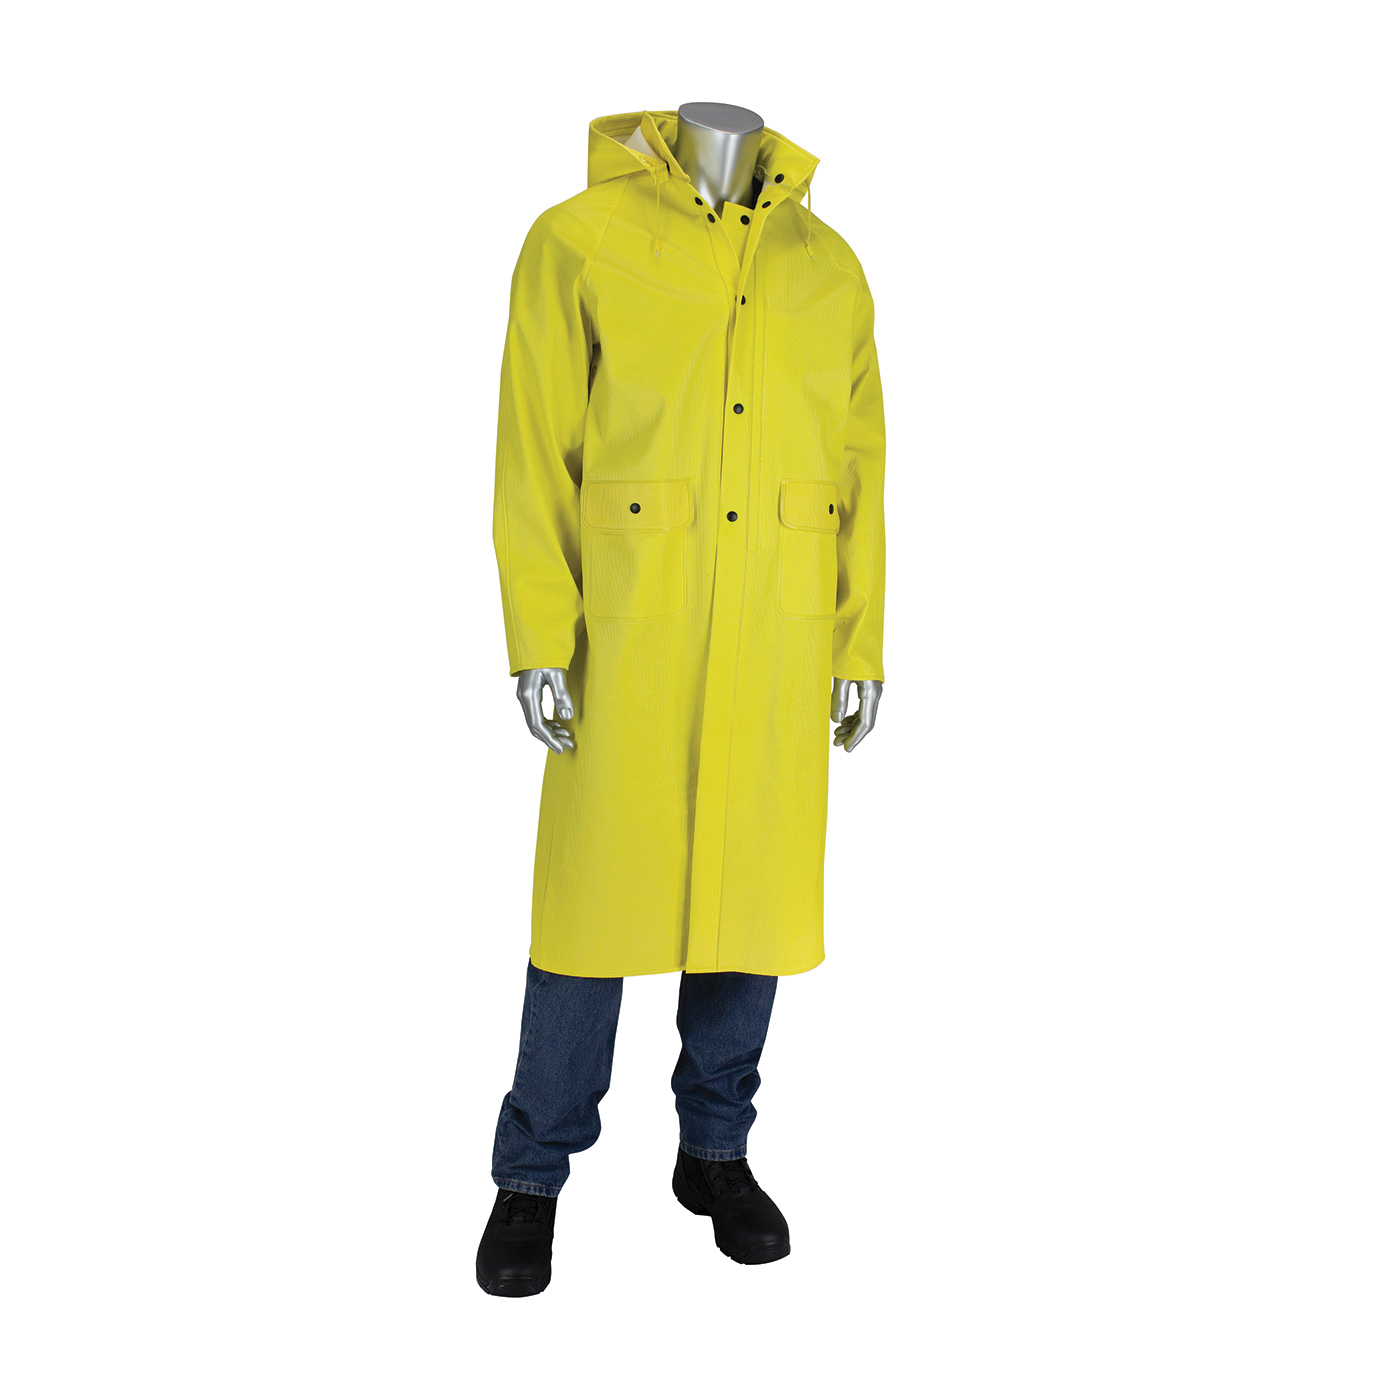 PIP® FALCON™ Flex™ 201-650C/S 2-Piece Ribbed Rain Jacket With Hood, S, Yellow, PVC/Non-Woven Polyester, Resists: Rips, Tear and Water